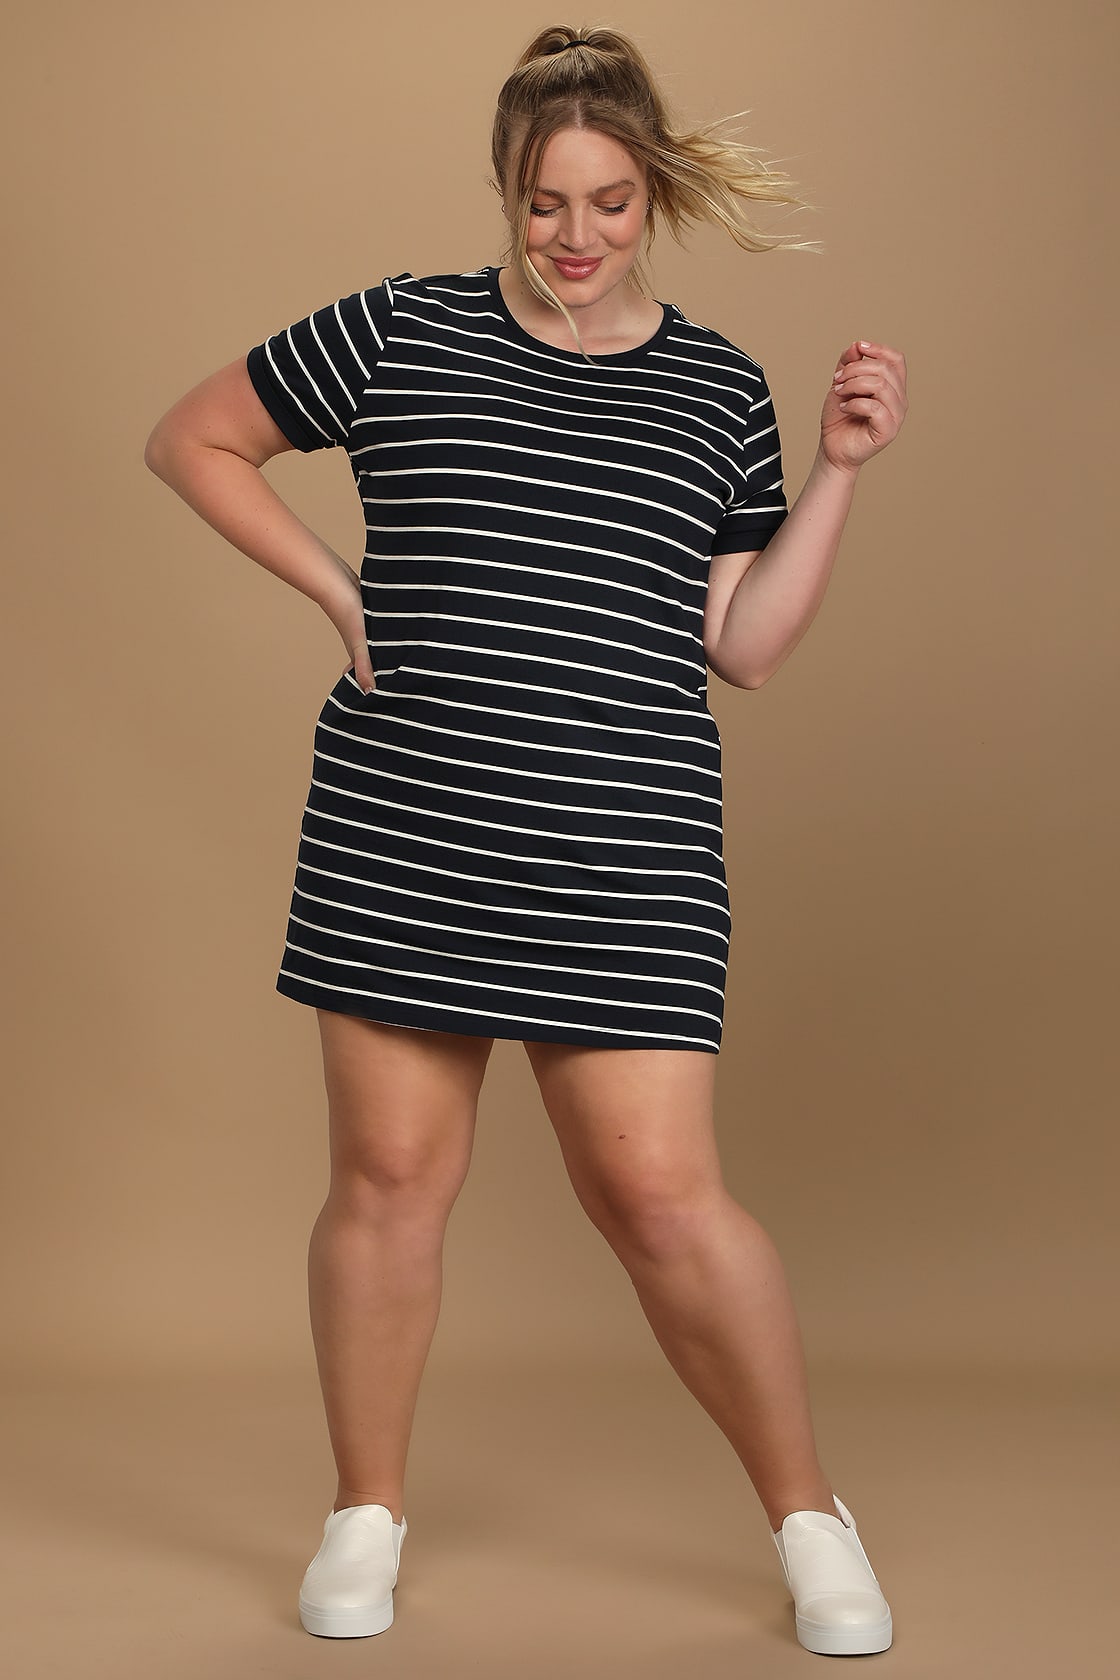 Plus Size Blue and White Stripe Dress for Greece Vacation